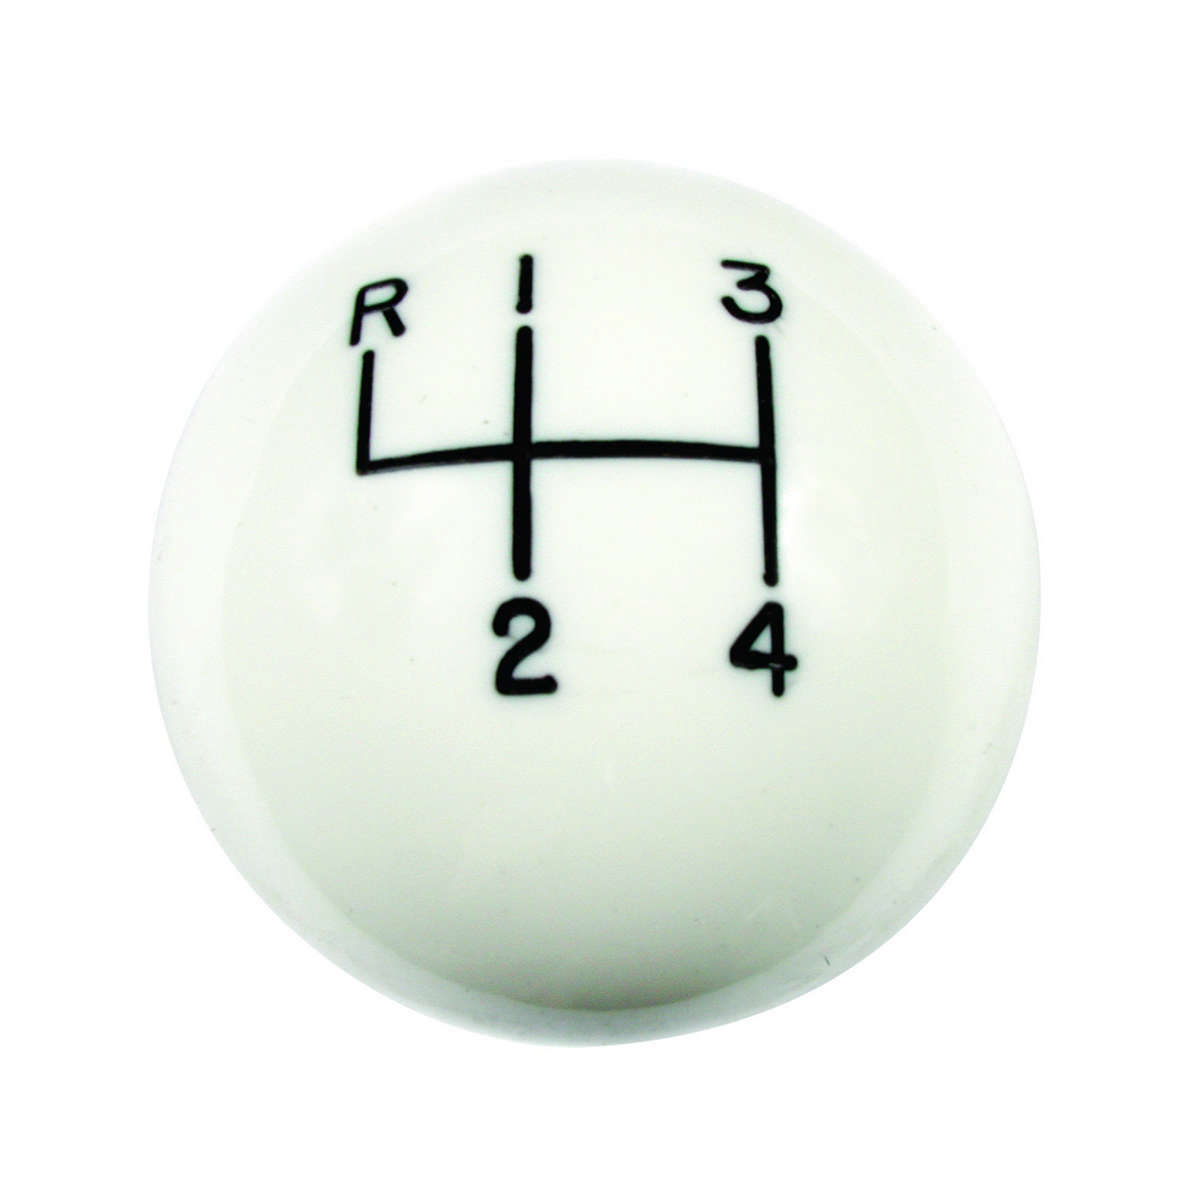 Ball Style Shifter Knobs